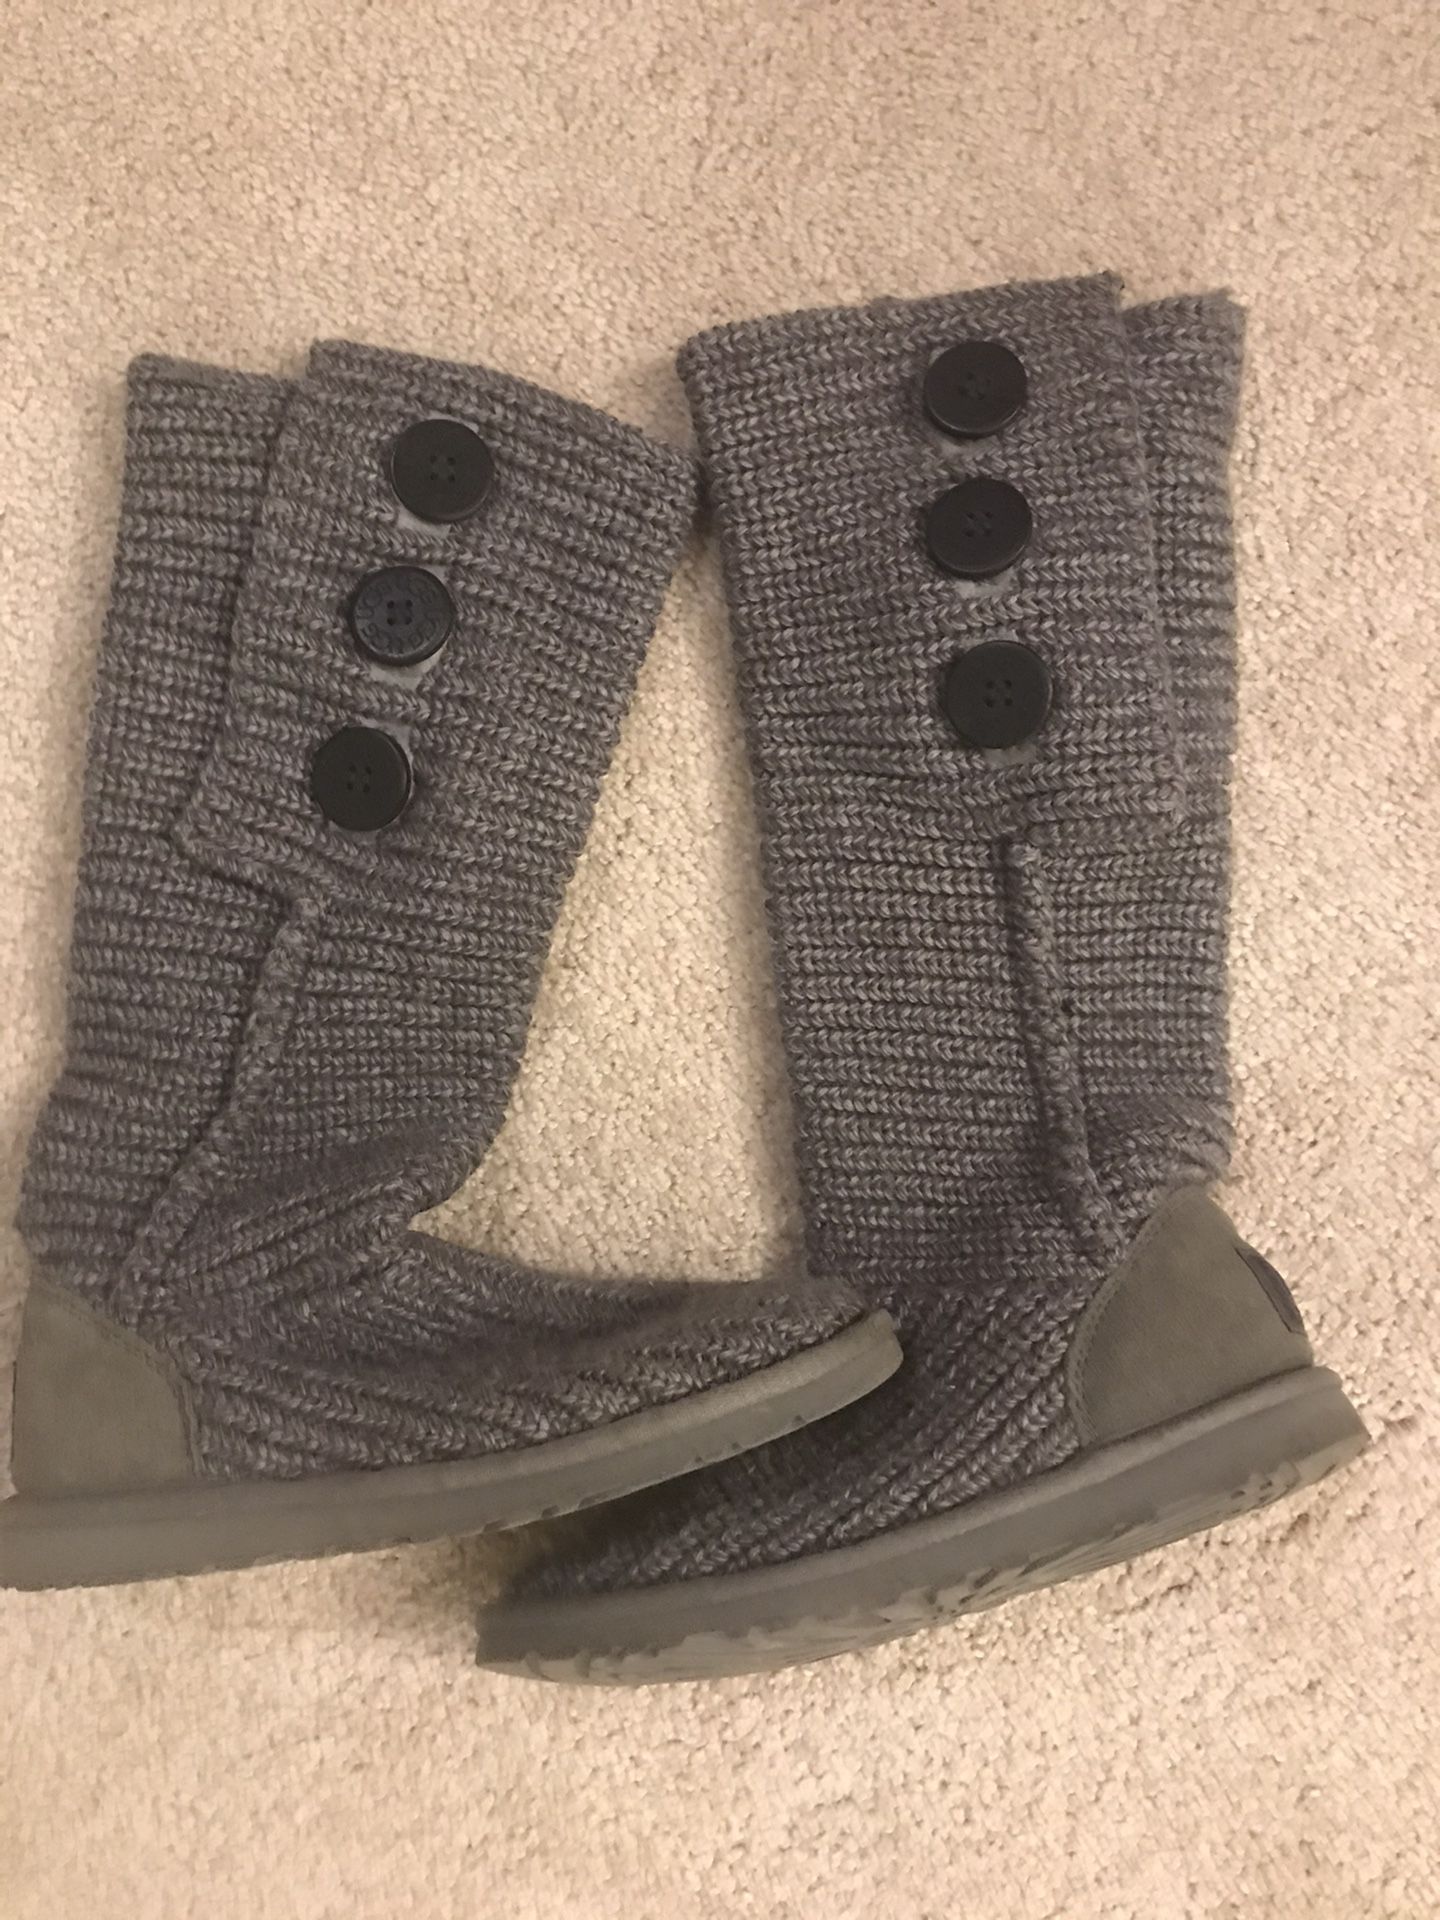 Ugg cardy boot women size 5